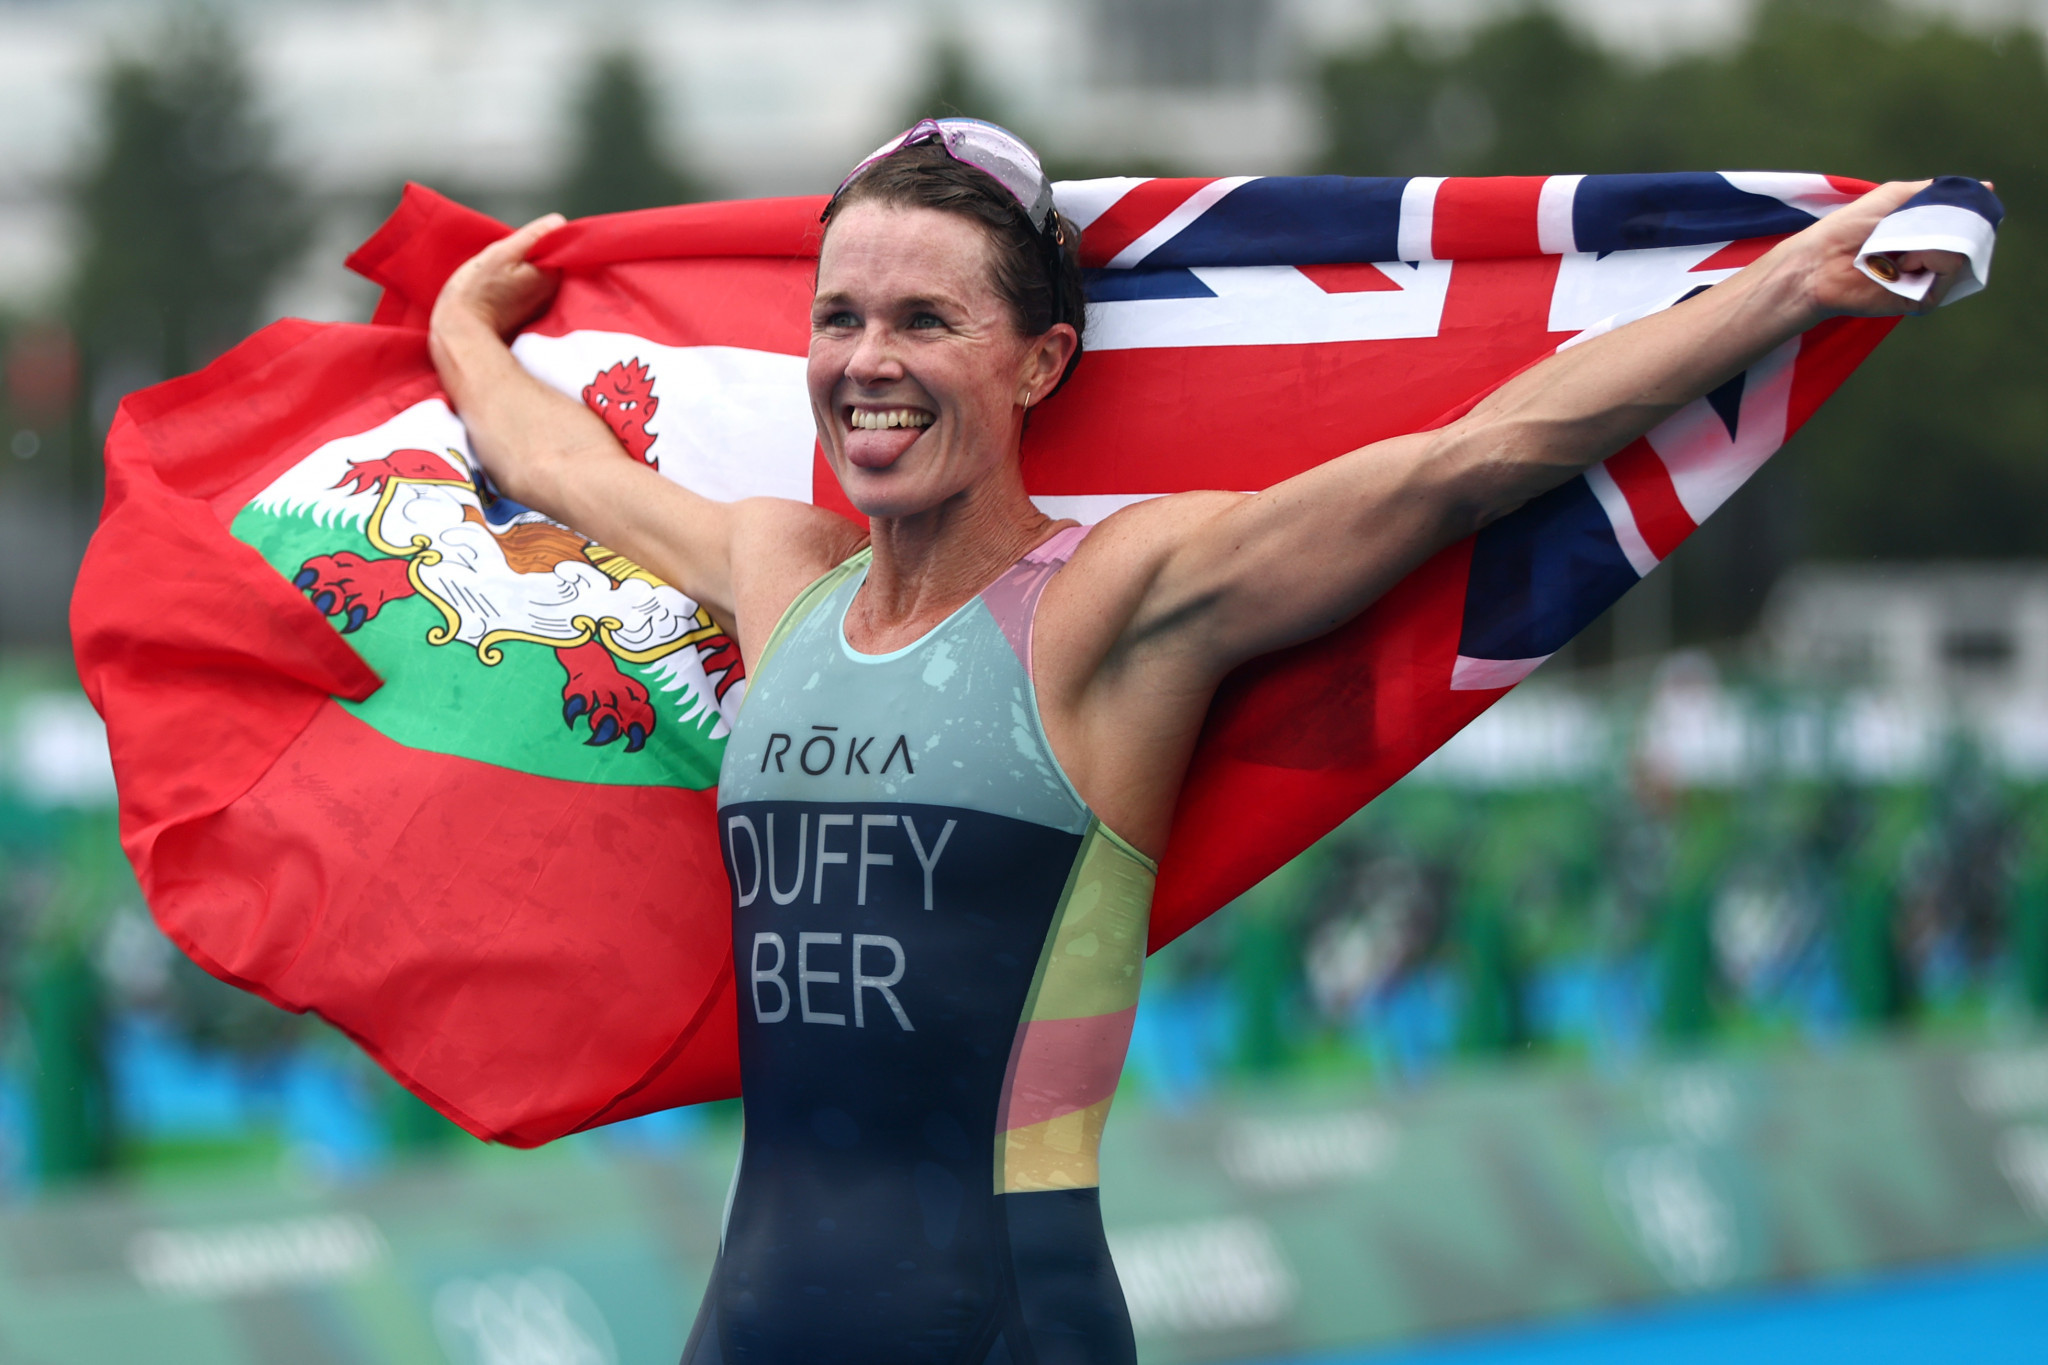 Duffy wins Bermuda's first Olympic gold medal with dominant display in women's triathlon 